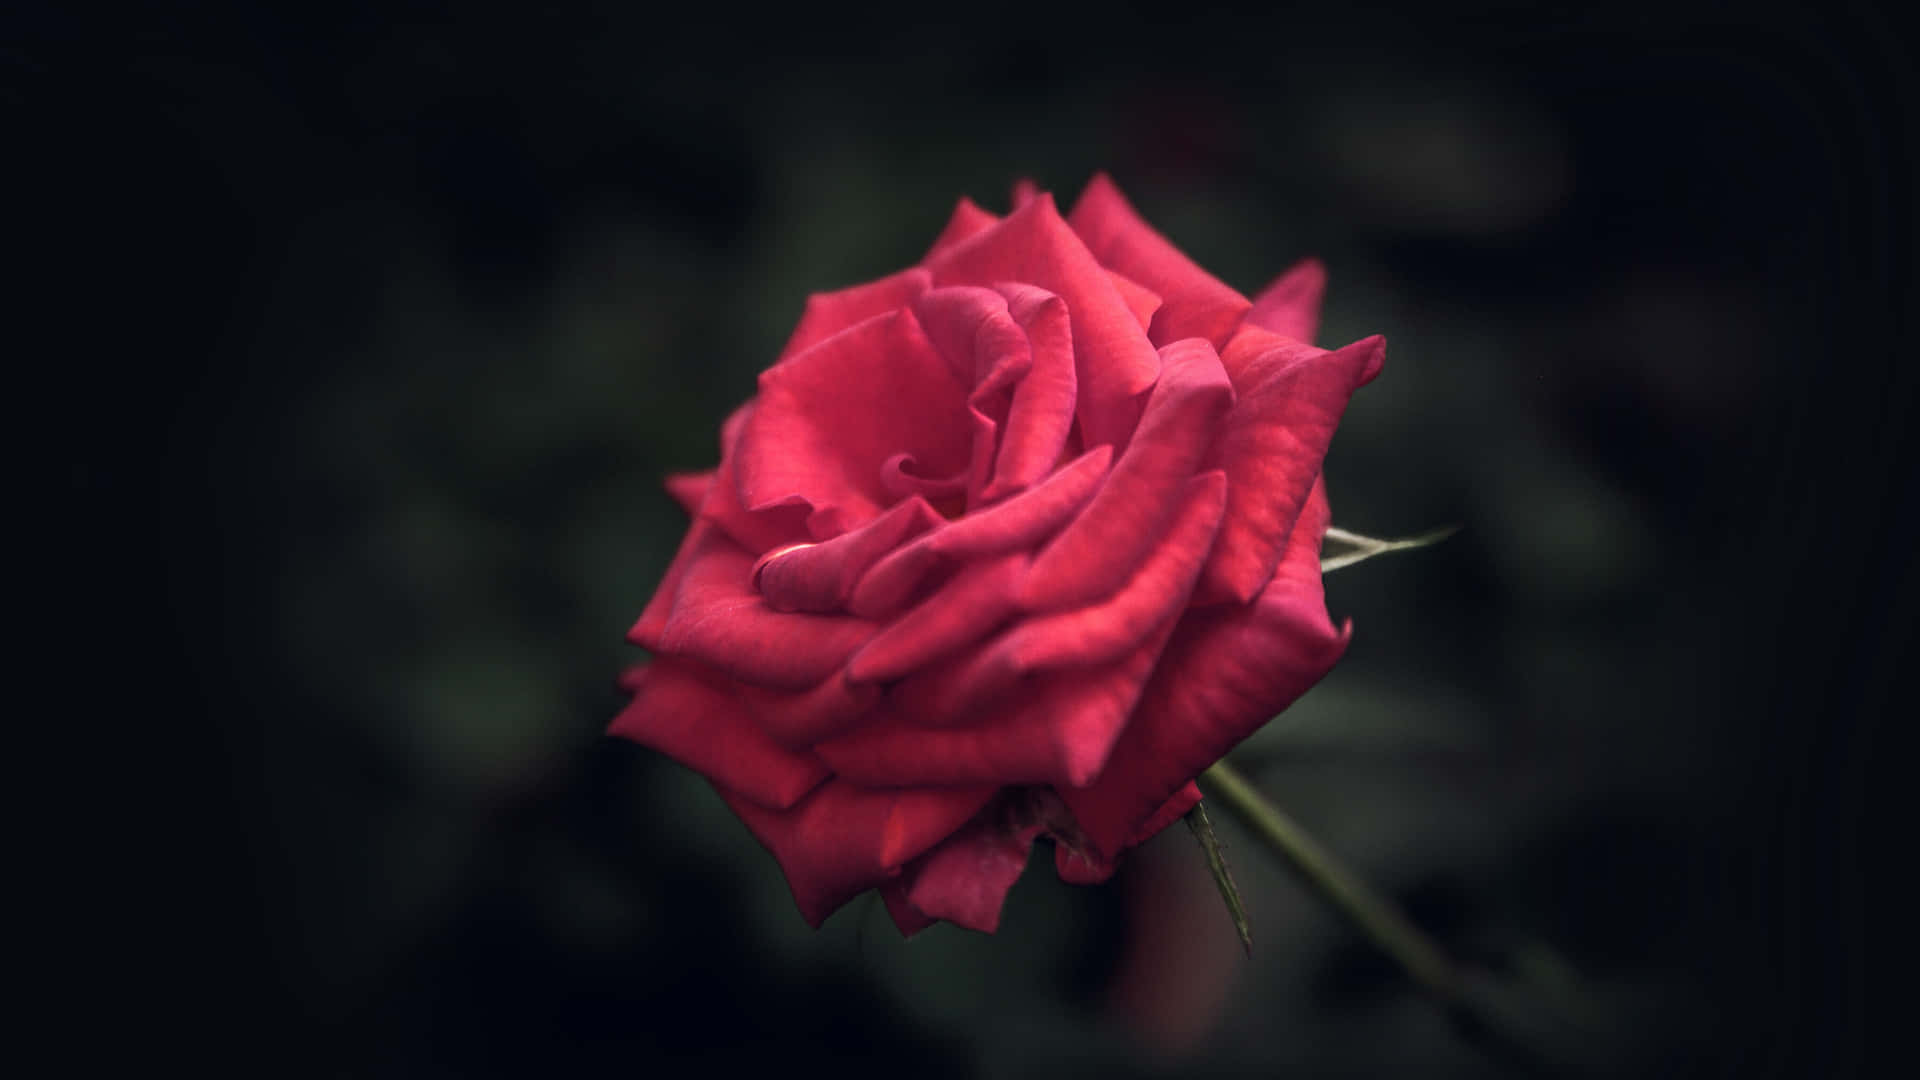 A cool rose for the Rose of Passionate Love Wallpaper